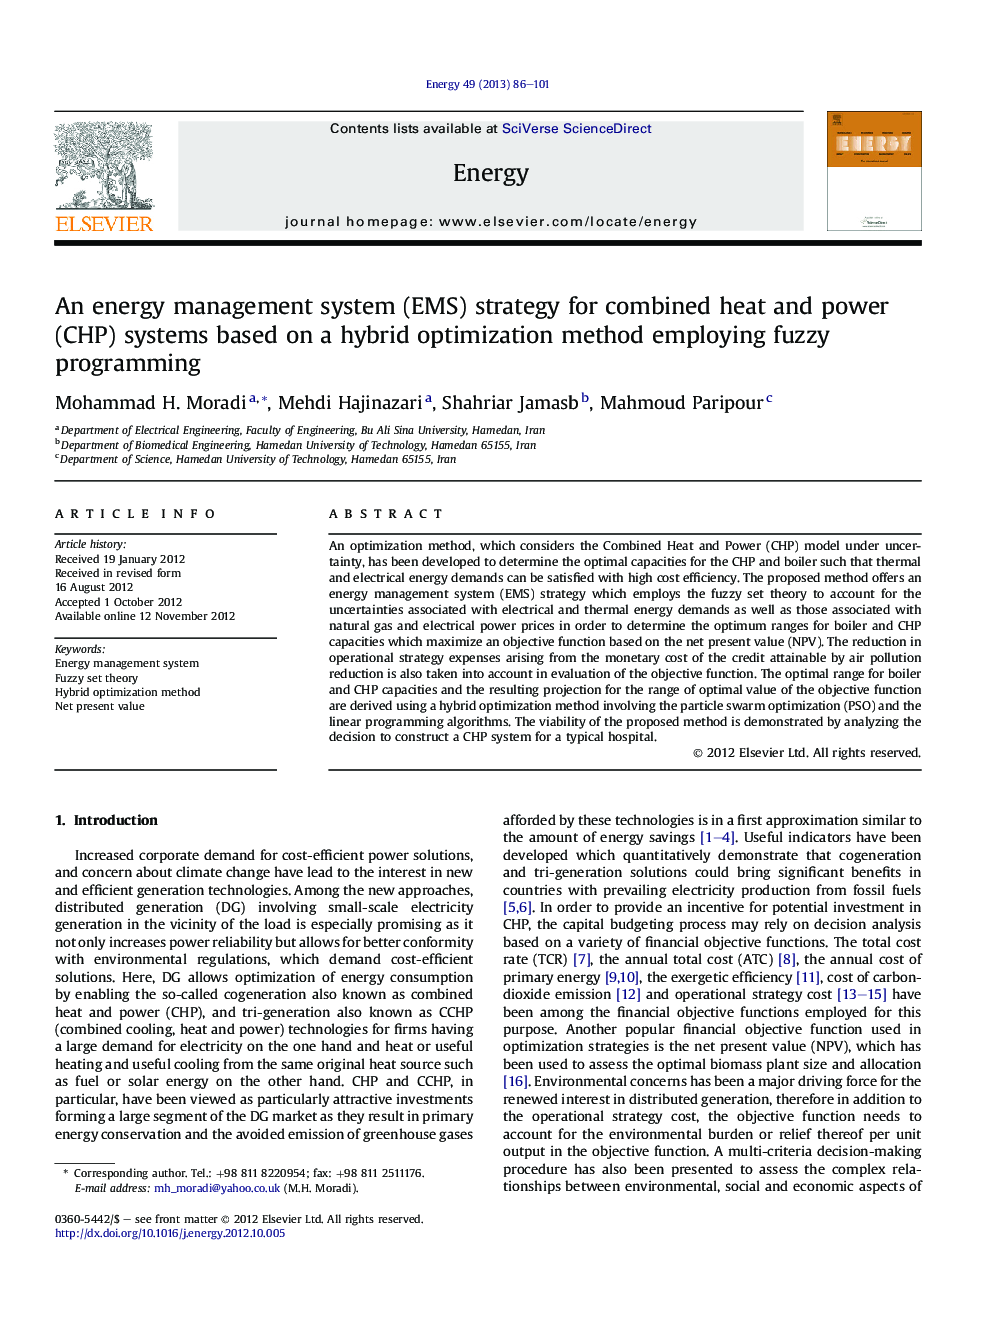 An energy management system (EMS) strategy for combined heat and power (CHP) systems based on a hybrid optimization method employing fuzzy programming